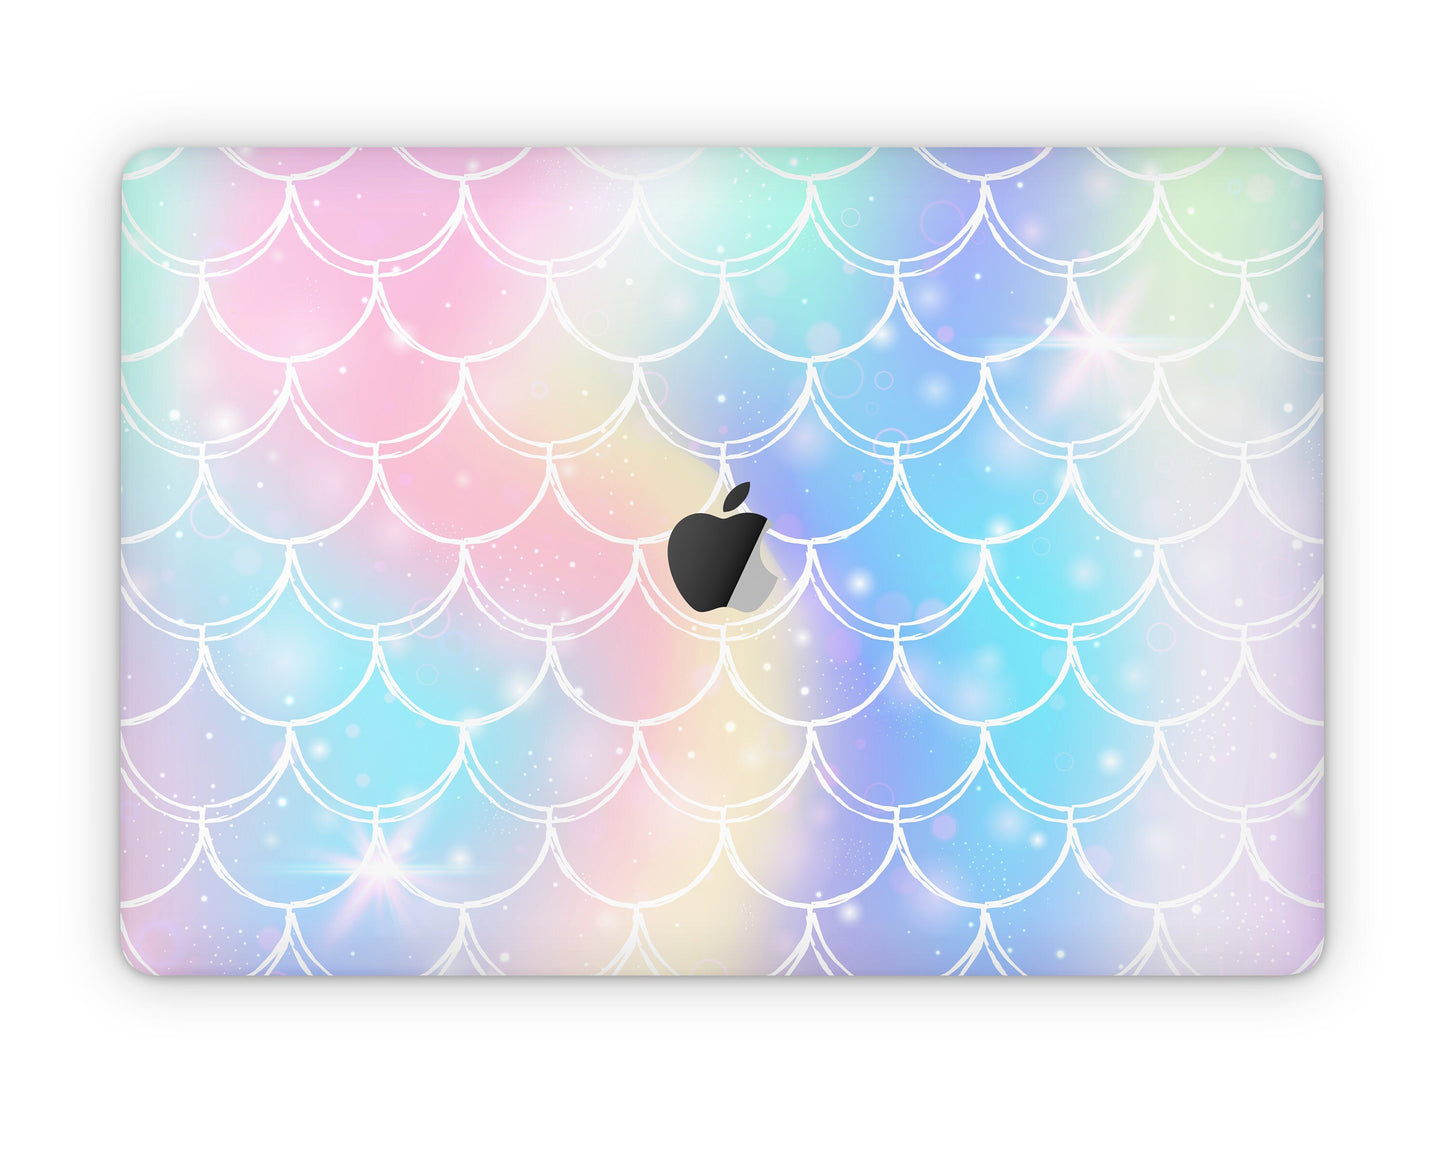 Lux Skins MacBook Iridescent Pastel Mermaid Pro 13" M1 (A2338) Skins - Pattern Abstract Skin